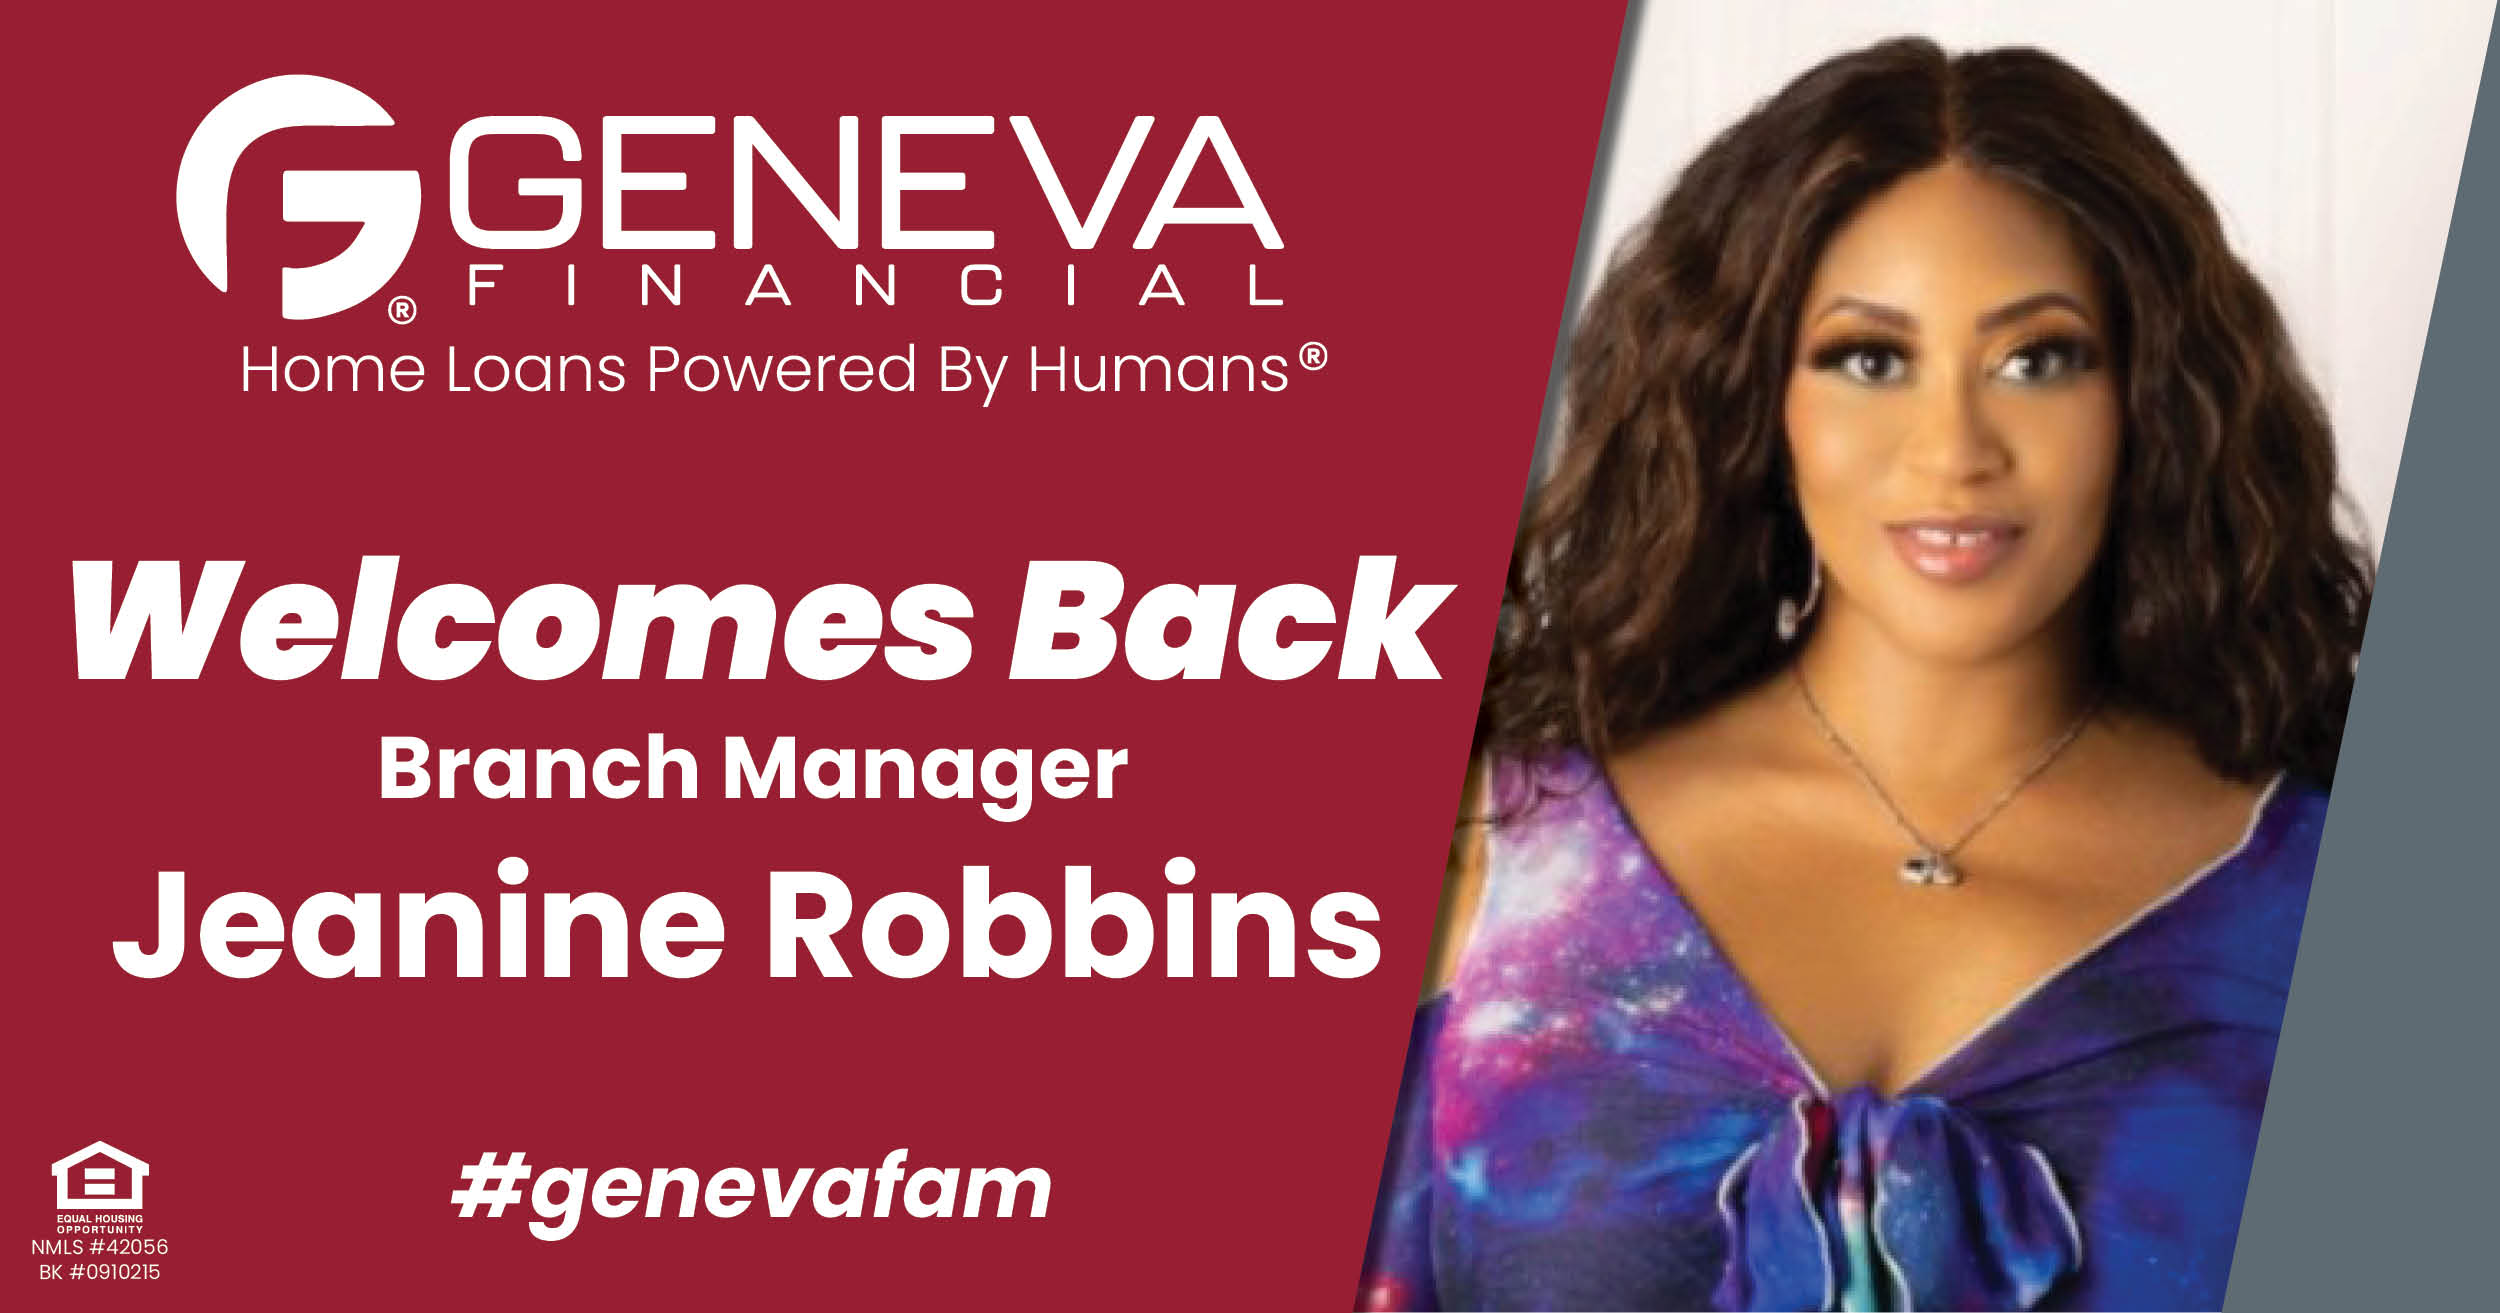 Geneva Financial Welcomes Back Branch Manager Jeanine Robbins to Scottsdale, AZ – Home Loans Powered by Humans®.